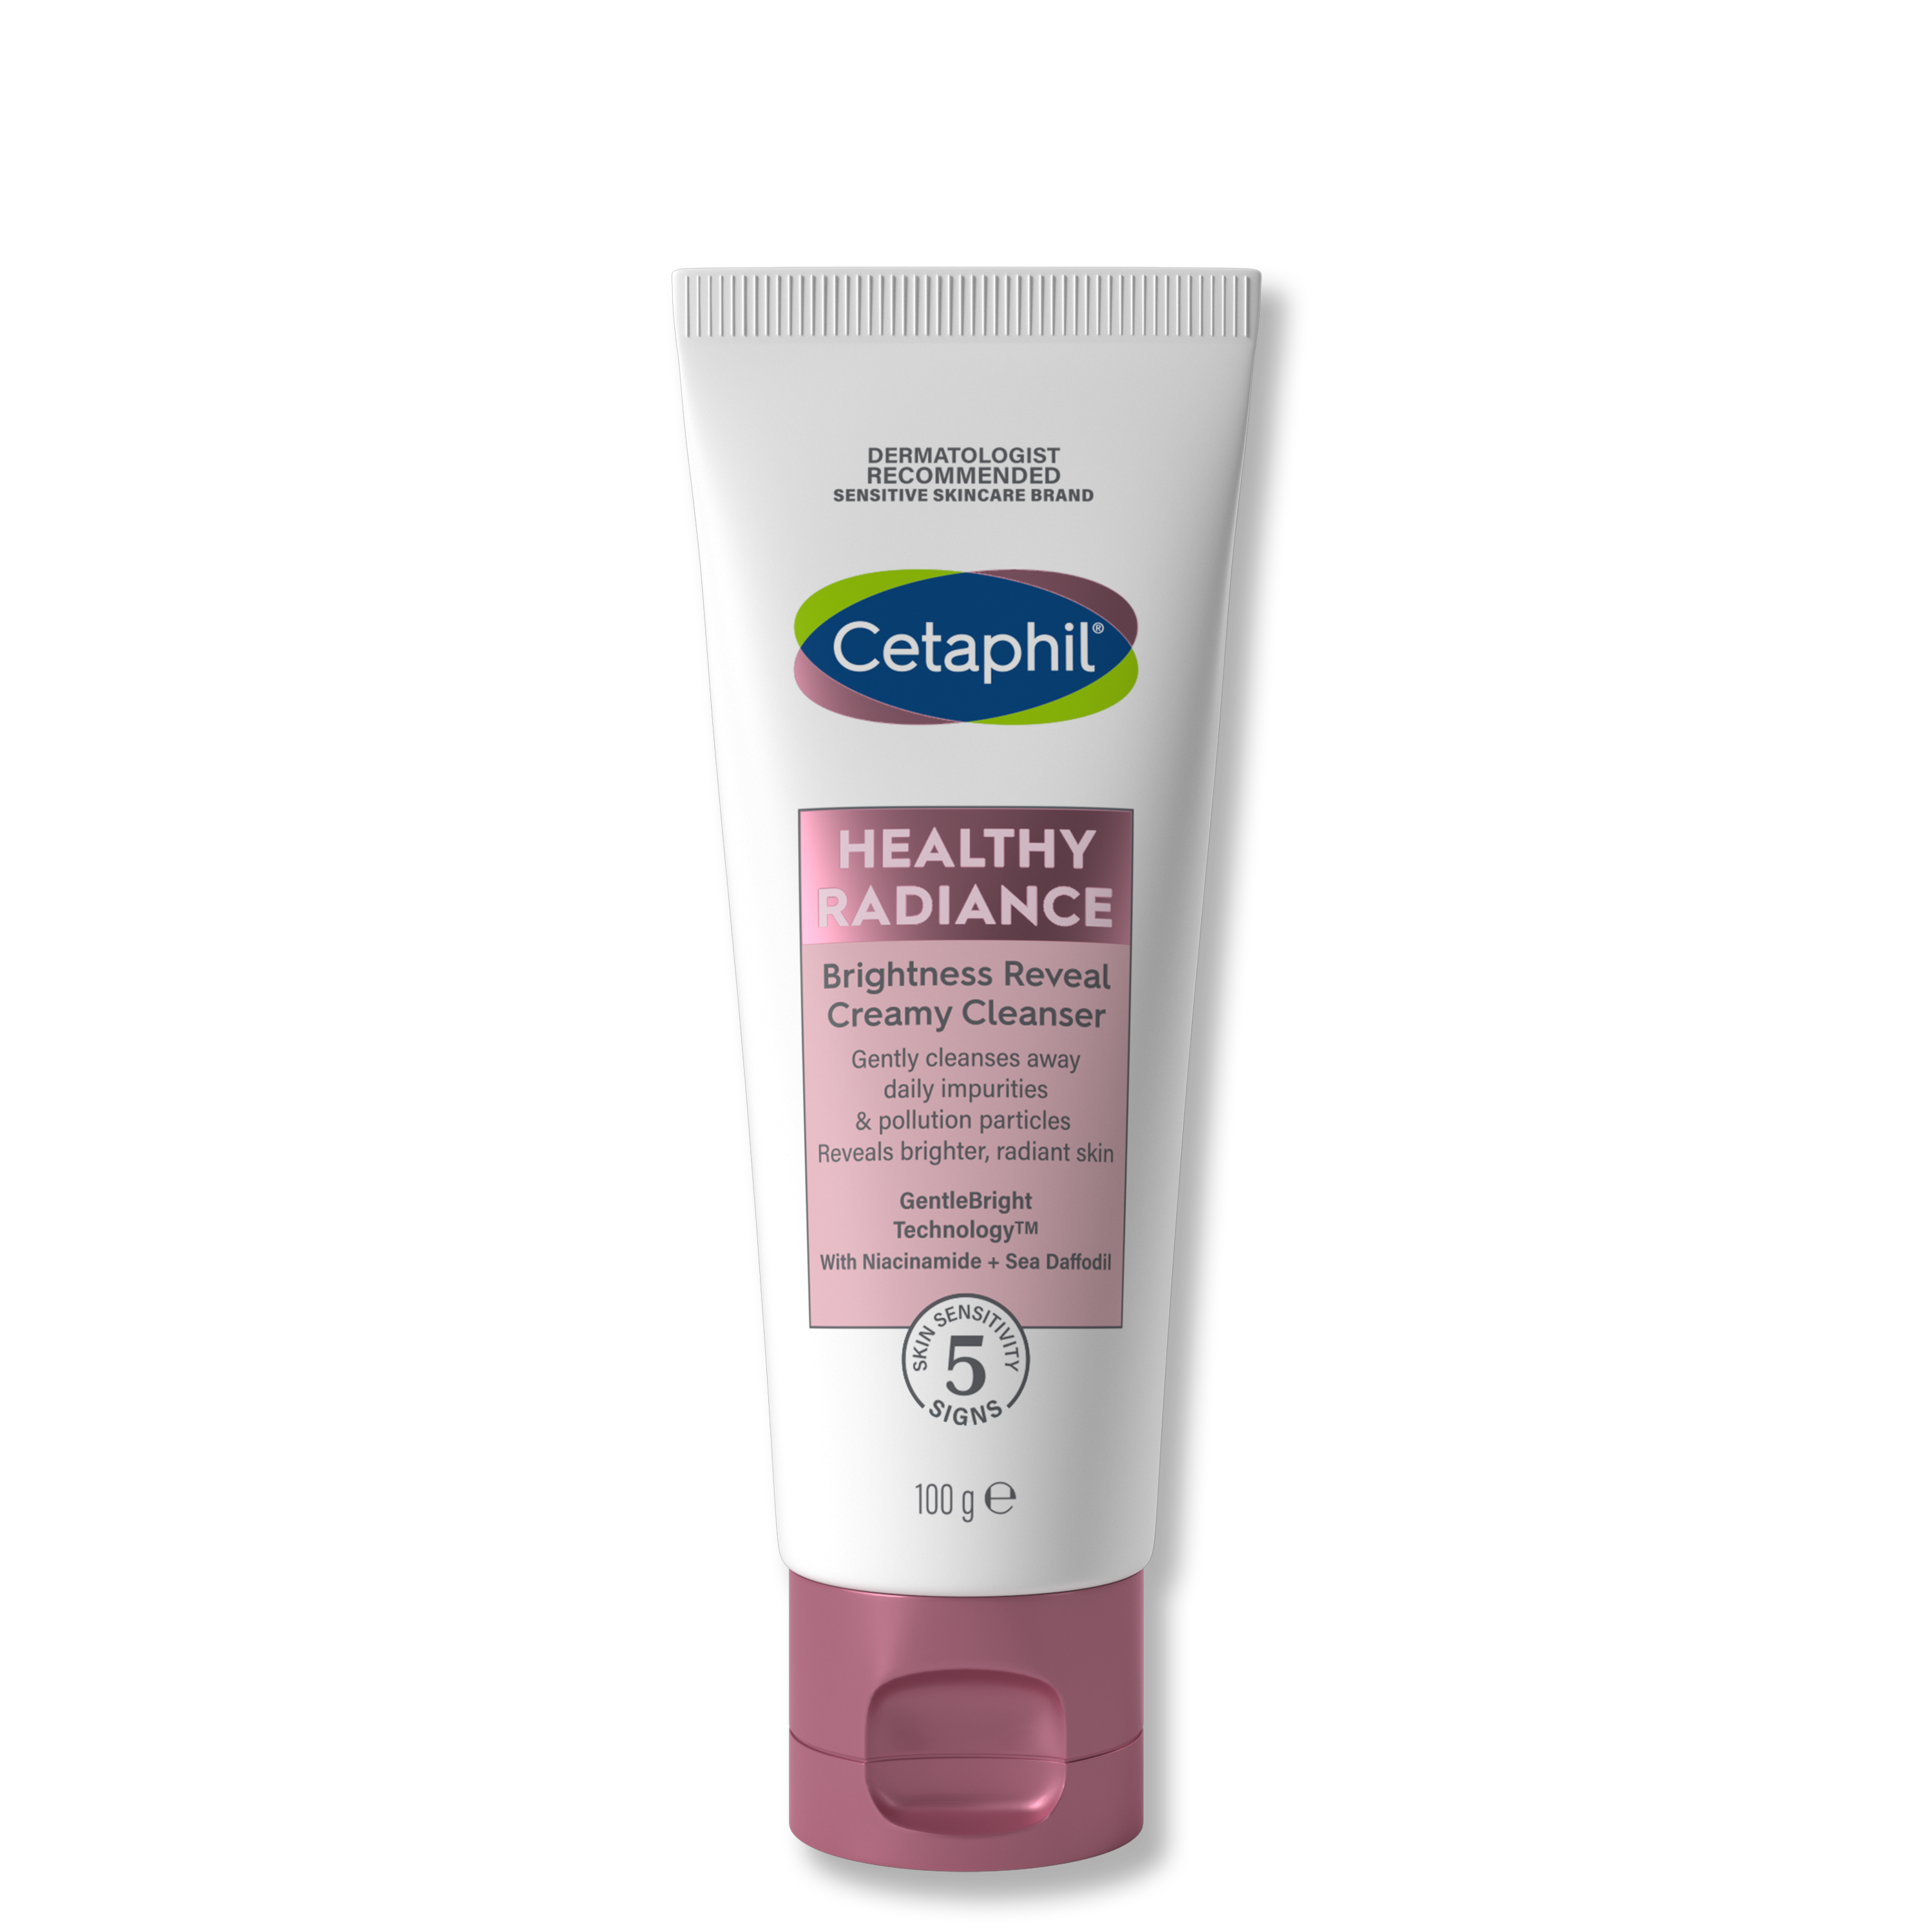 Healthy Radiance Brightness Reveal Creamy Cleanser